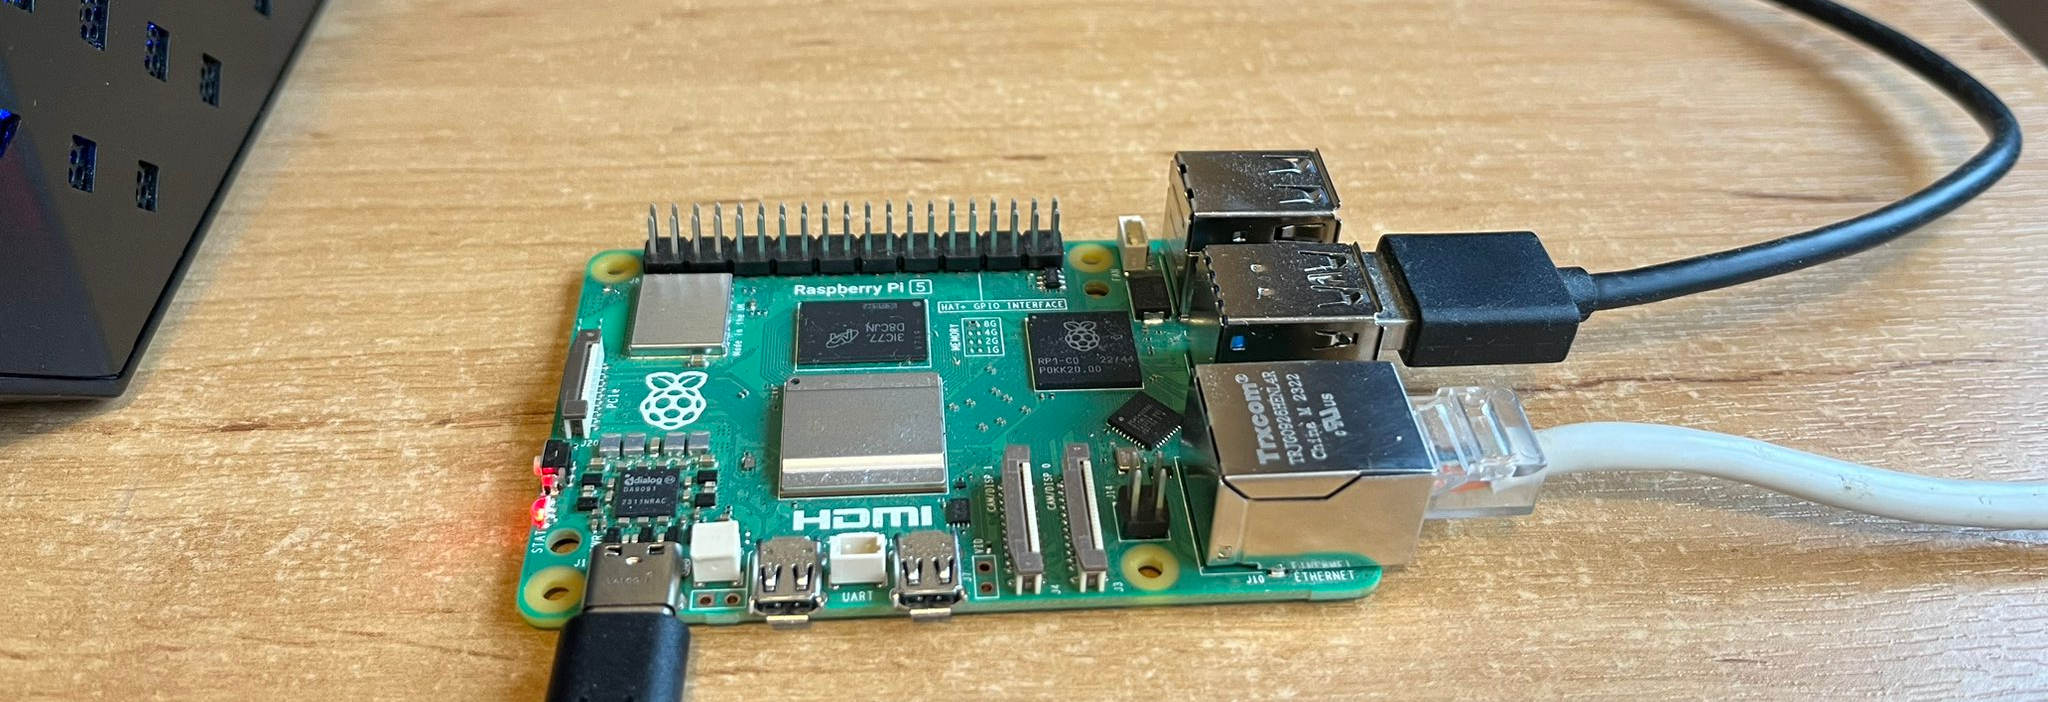 Today the Raspberry Pi Foundation announced the long awaited release of the Raspberry Pi 5. The first retail devices will be shipping to customers at 